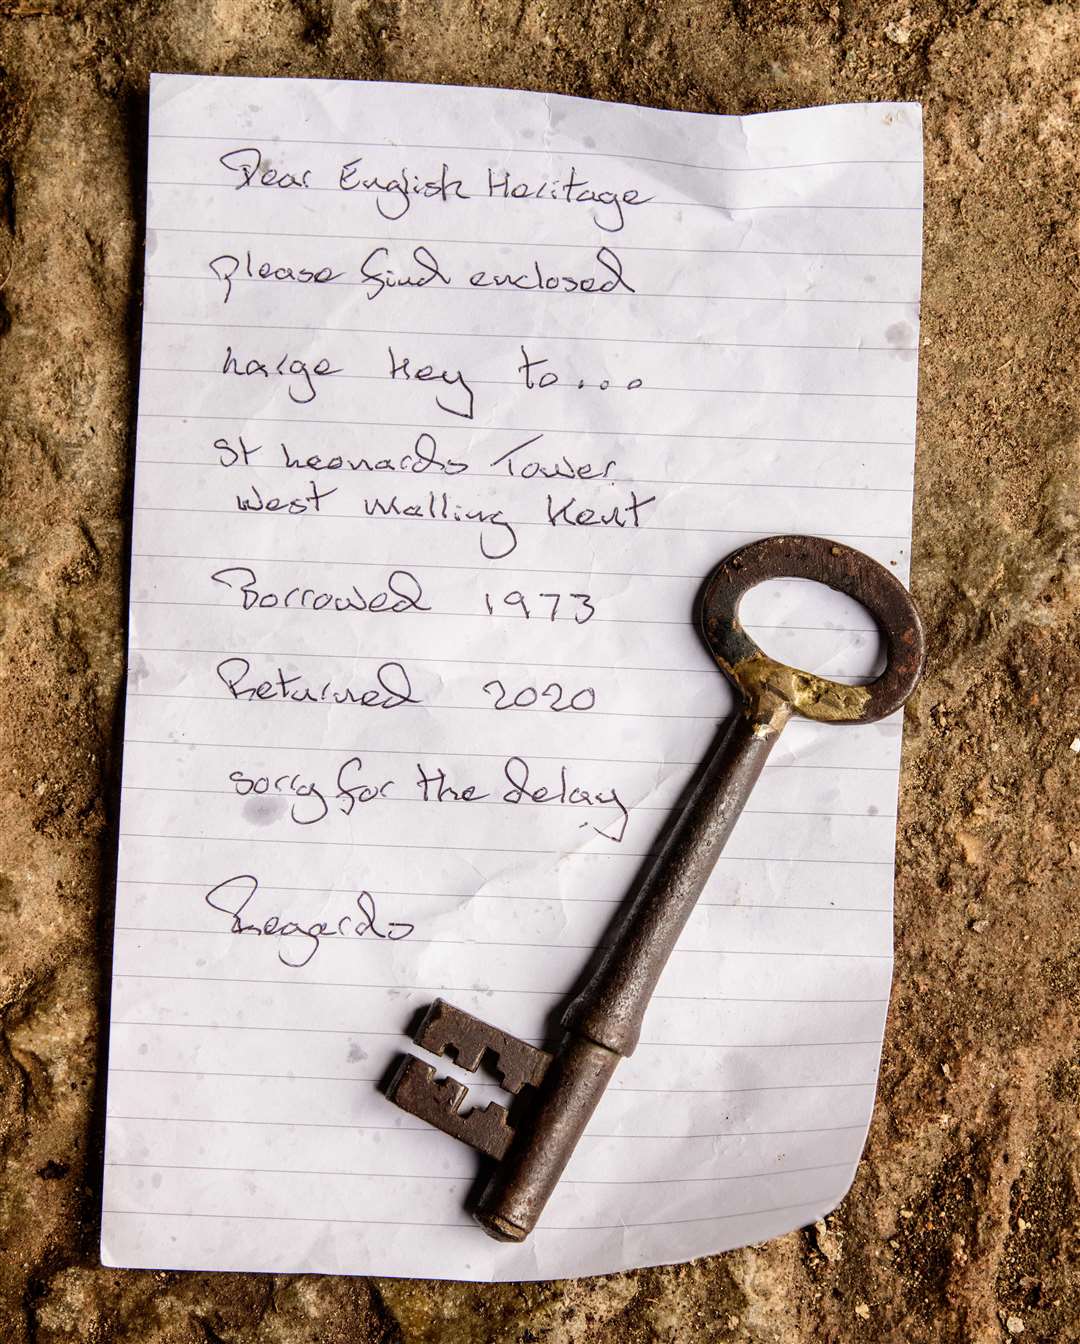 The key to West Malling's St Leonard’s Tower with the anonymous note Picture: Jim Holden